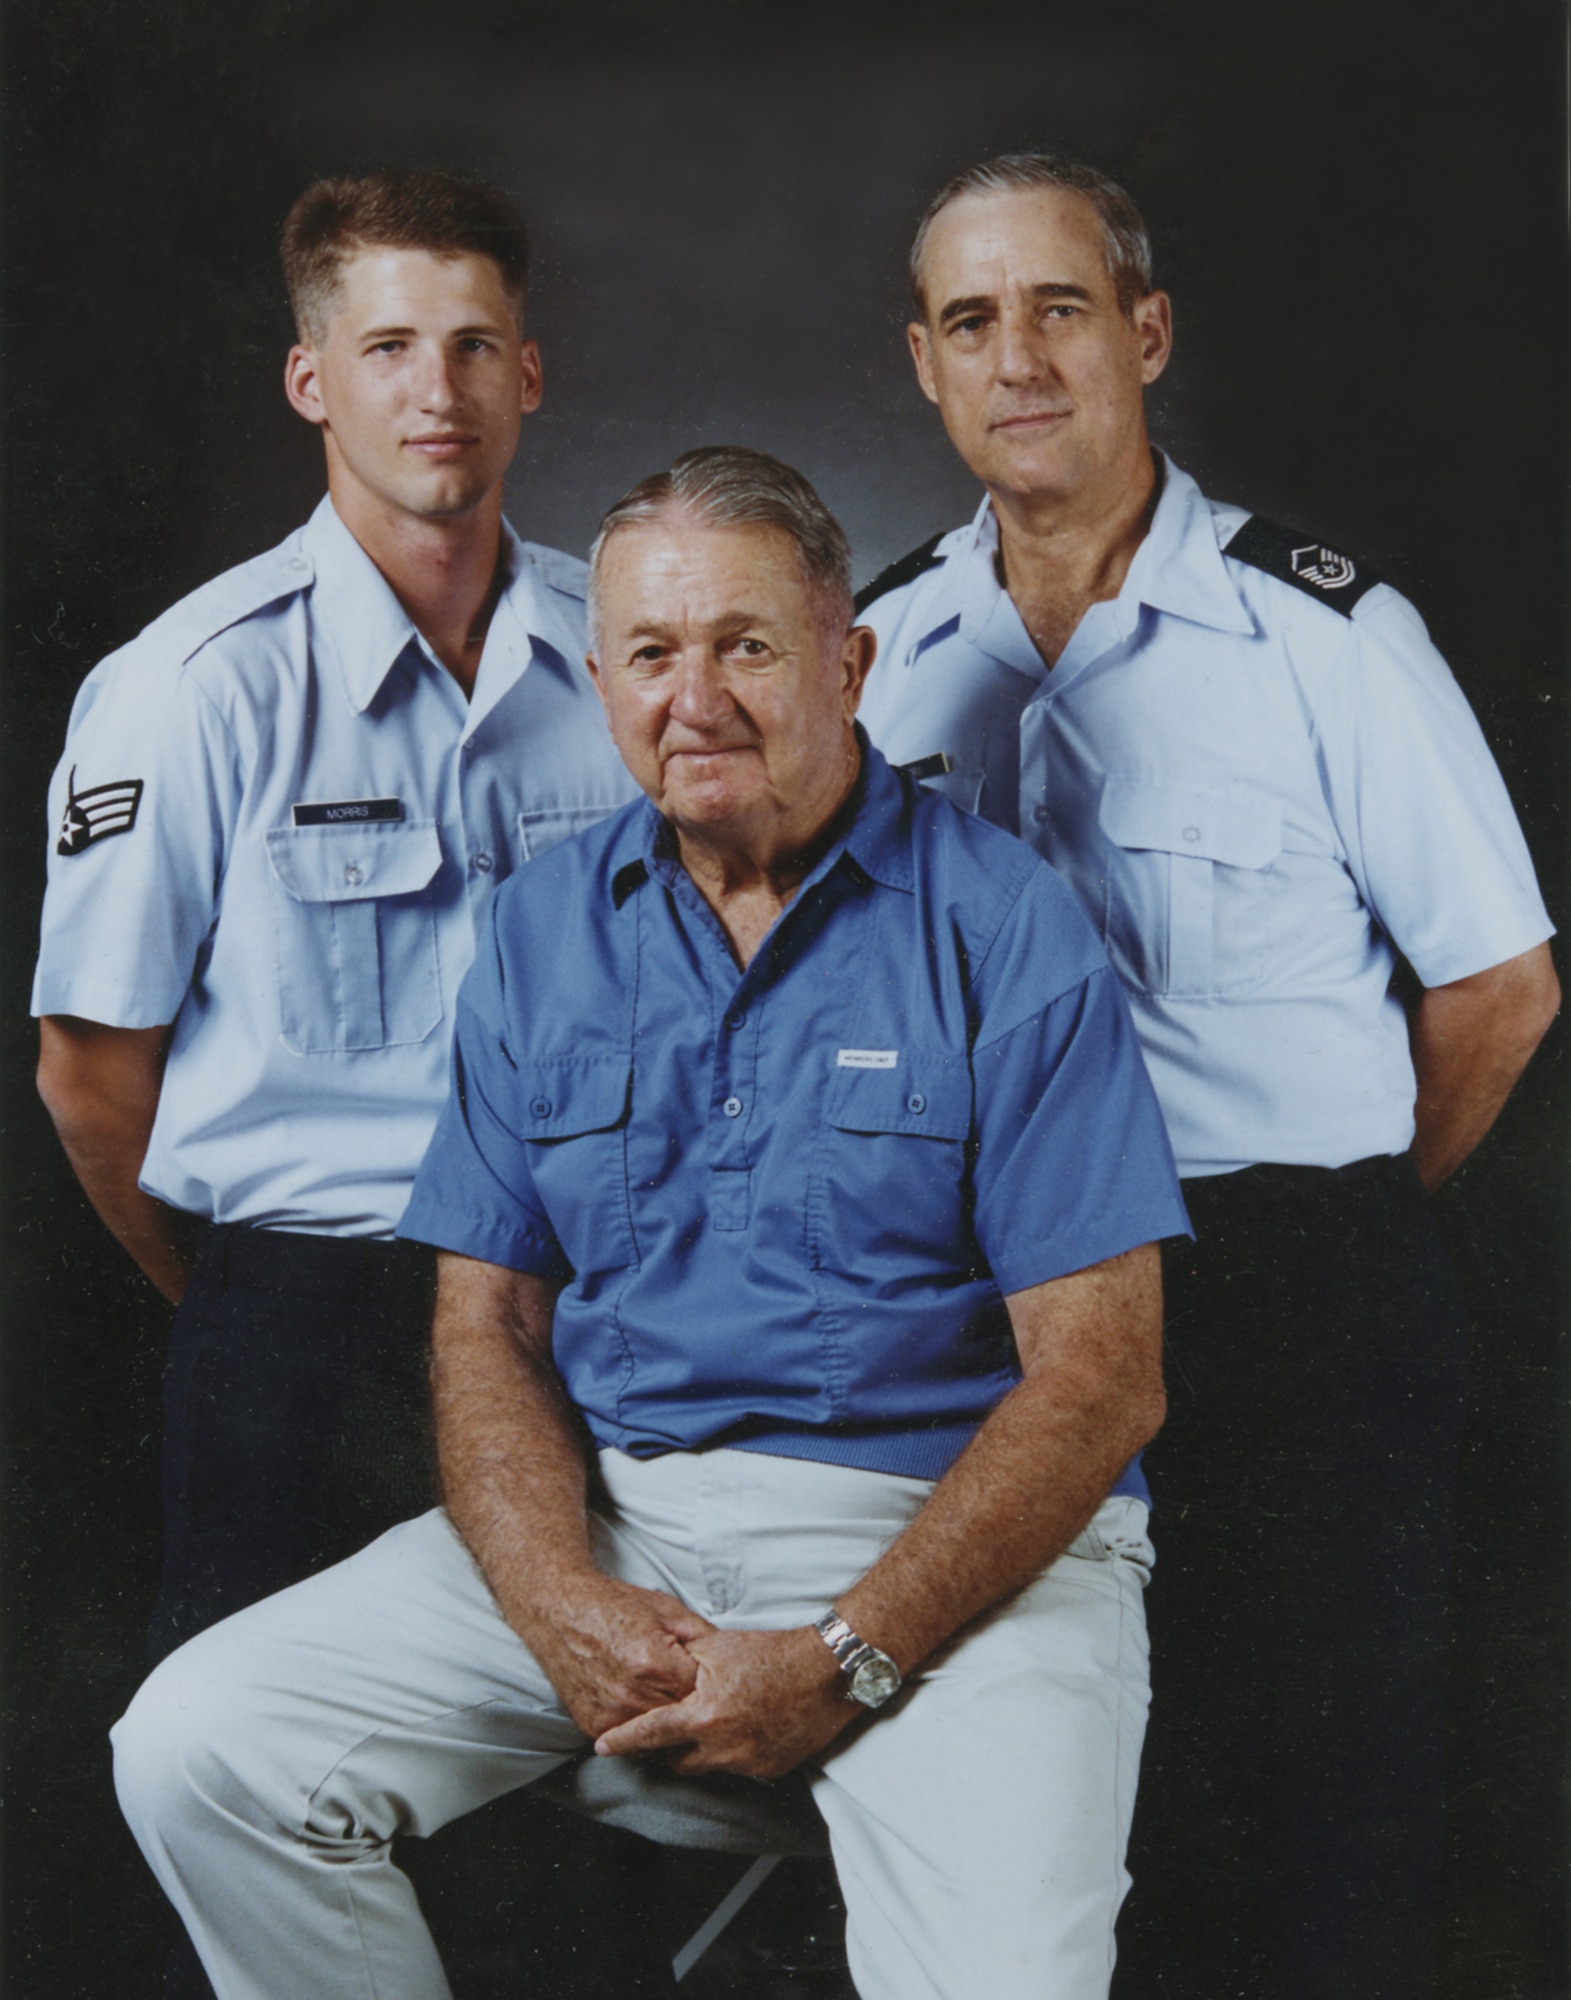 Maj. Gen. Donald E. Morris pictured here with his son Don Morris Jr. and his grandson John Morris. Both his son and grandson served at the 162nd as many other Tucson families have joined and served the Guard family. (U.S. Air National Guard photo)